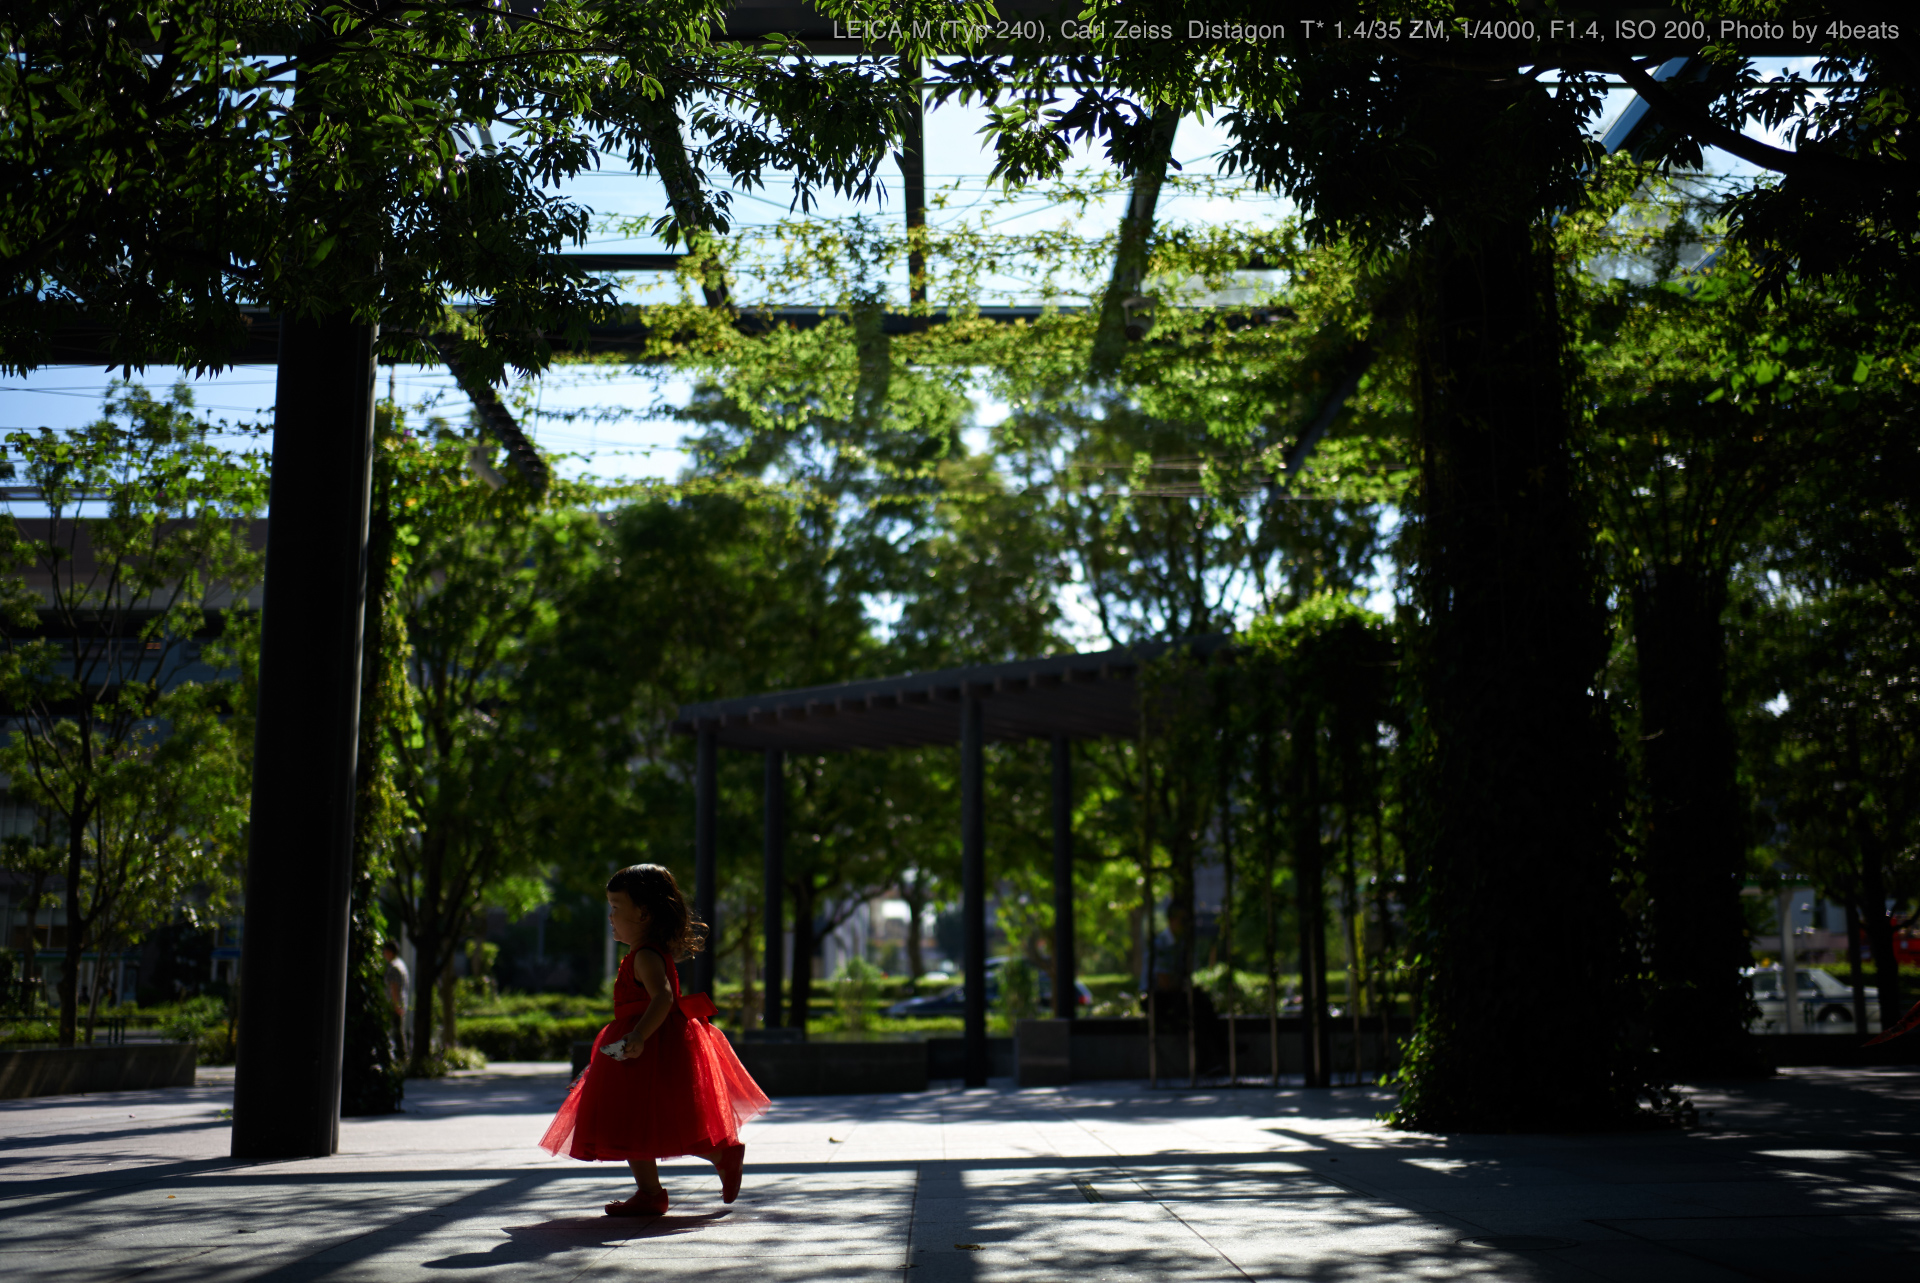 LEICA M (Typ 240), Carl Zeiss  Distagon  T* 1.4/35 ZM, 1/4000, F1.4, ISO 200, Photo by 4beats